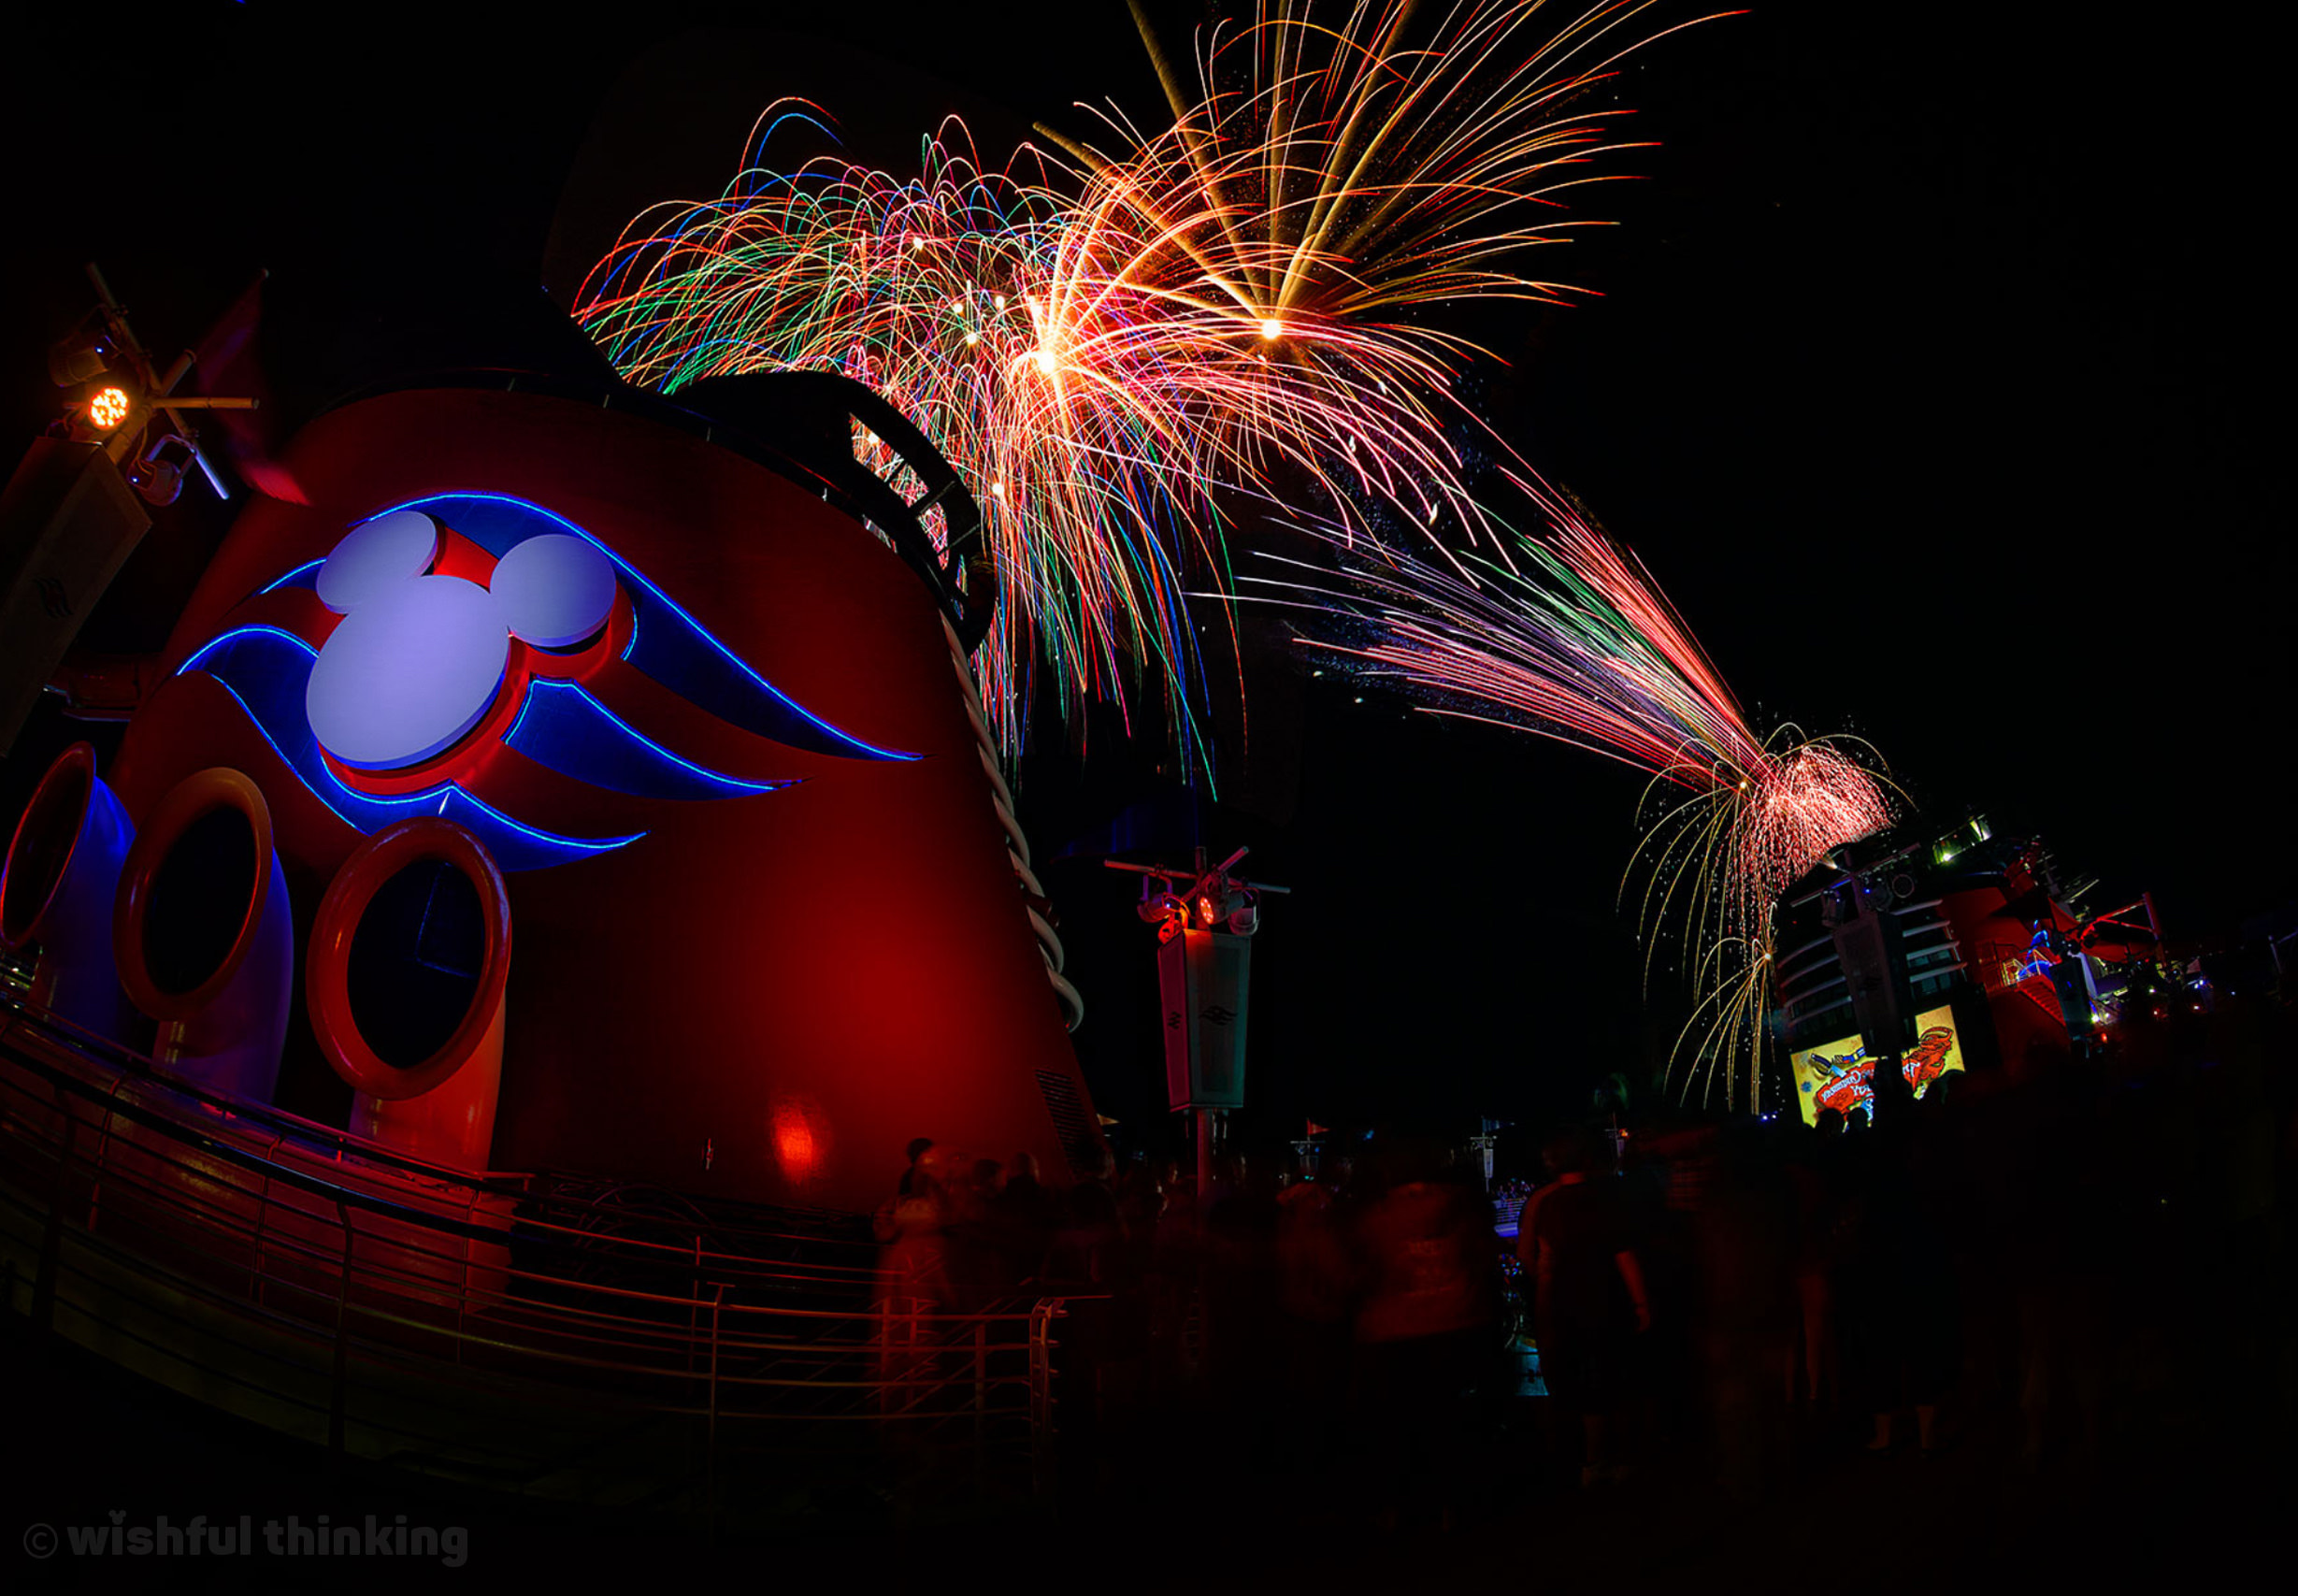 Firworks illuminate the sky over guests on board a Disney Cruise Line ship